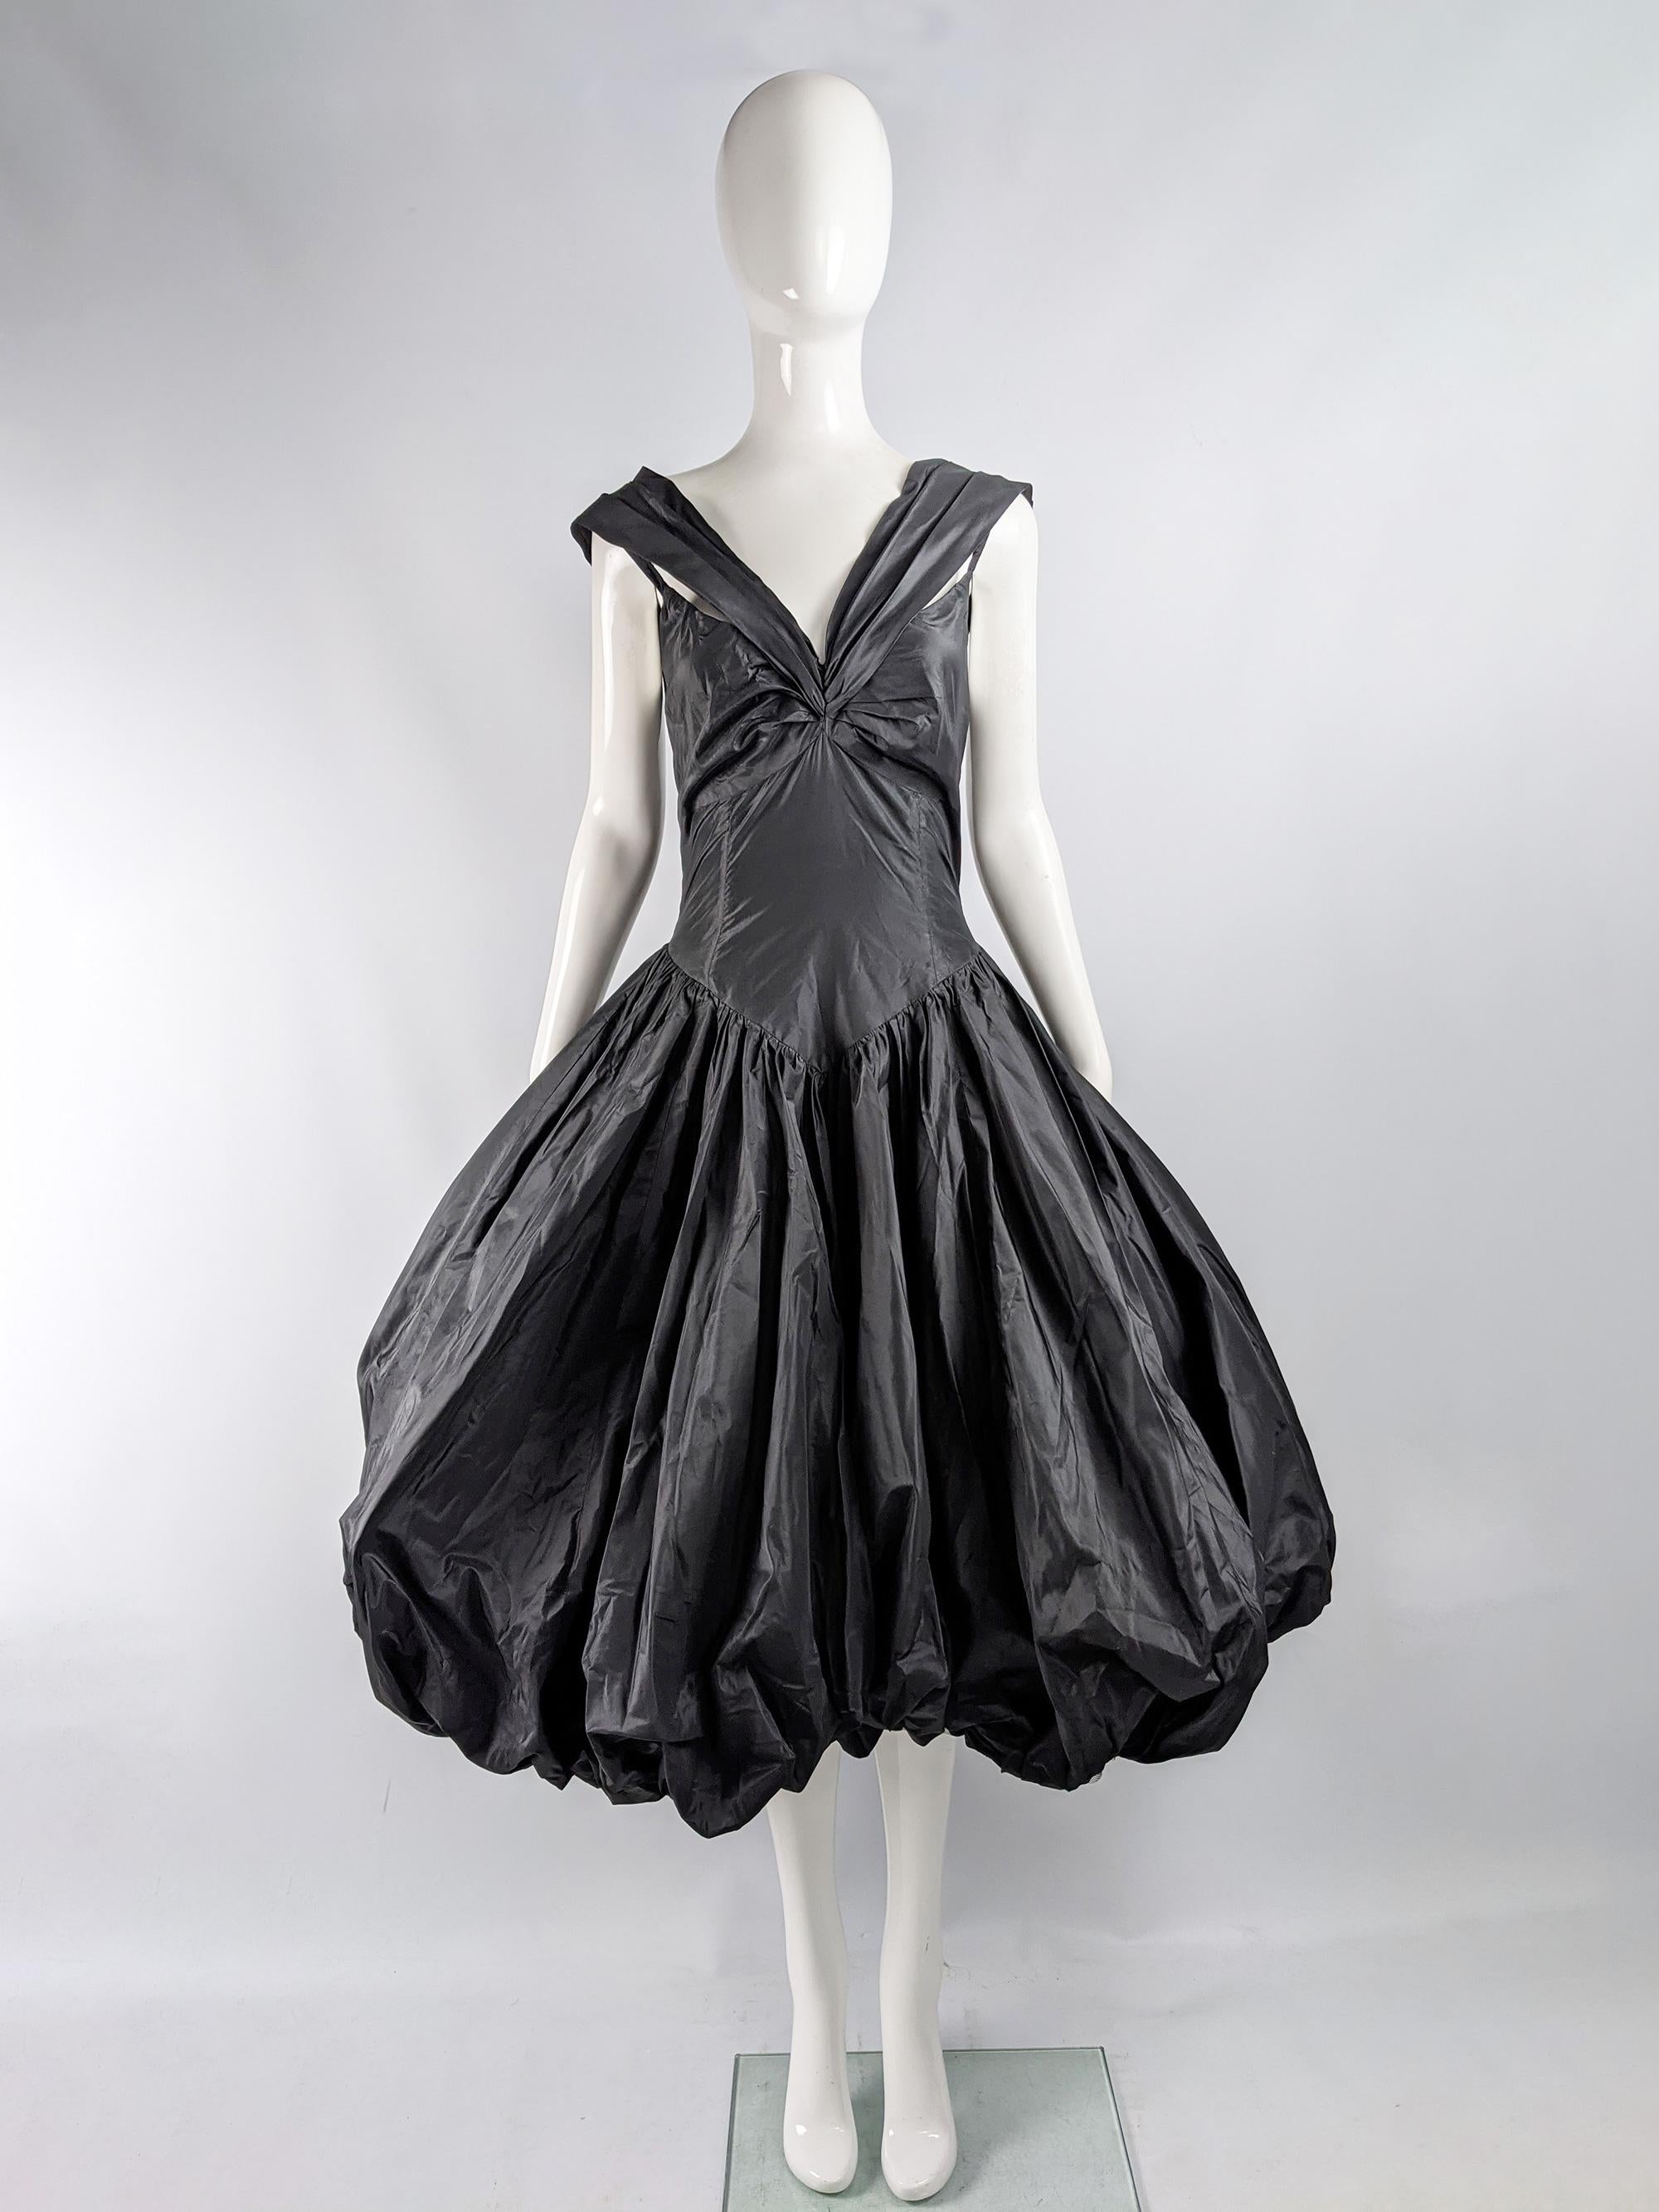 An absolutely breathtaking vintage womens dress from the 80s by luxury British fashion designer, David Fielden. Incredible quality,  in a black silk taffeta with a huge puffball skirt and double strap detail. Perfect for a formal party or red carpet